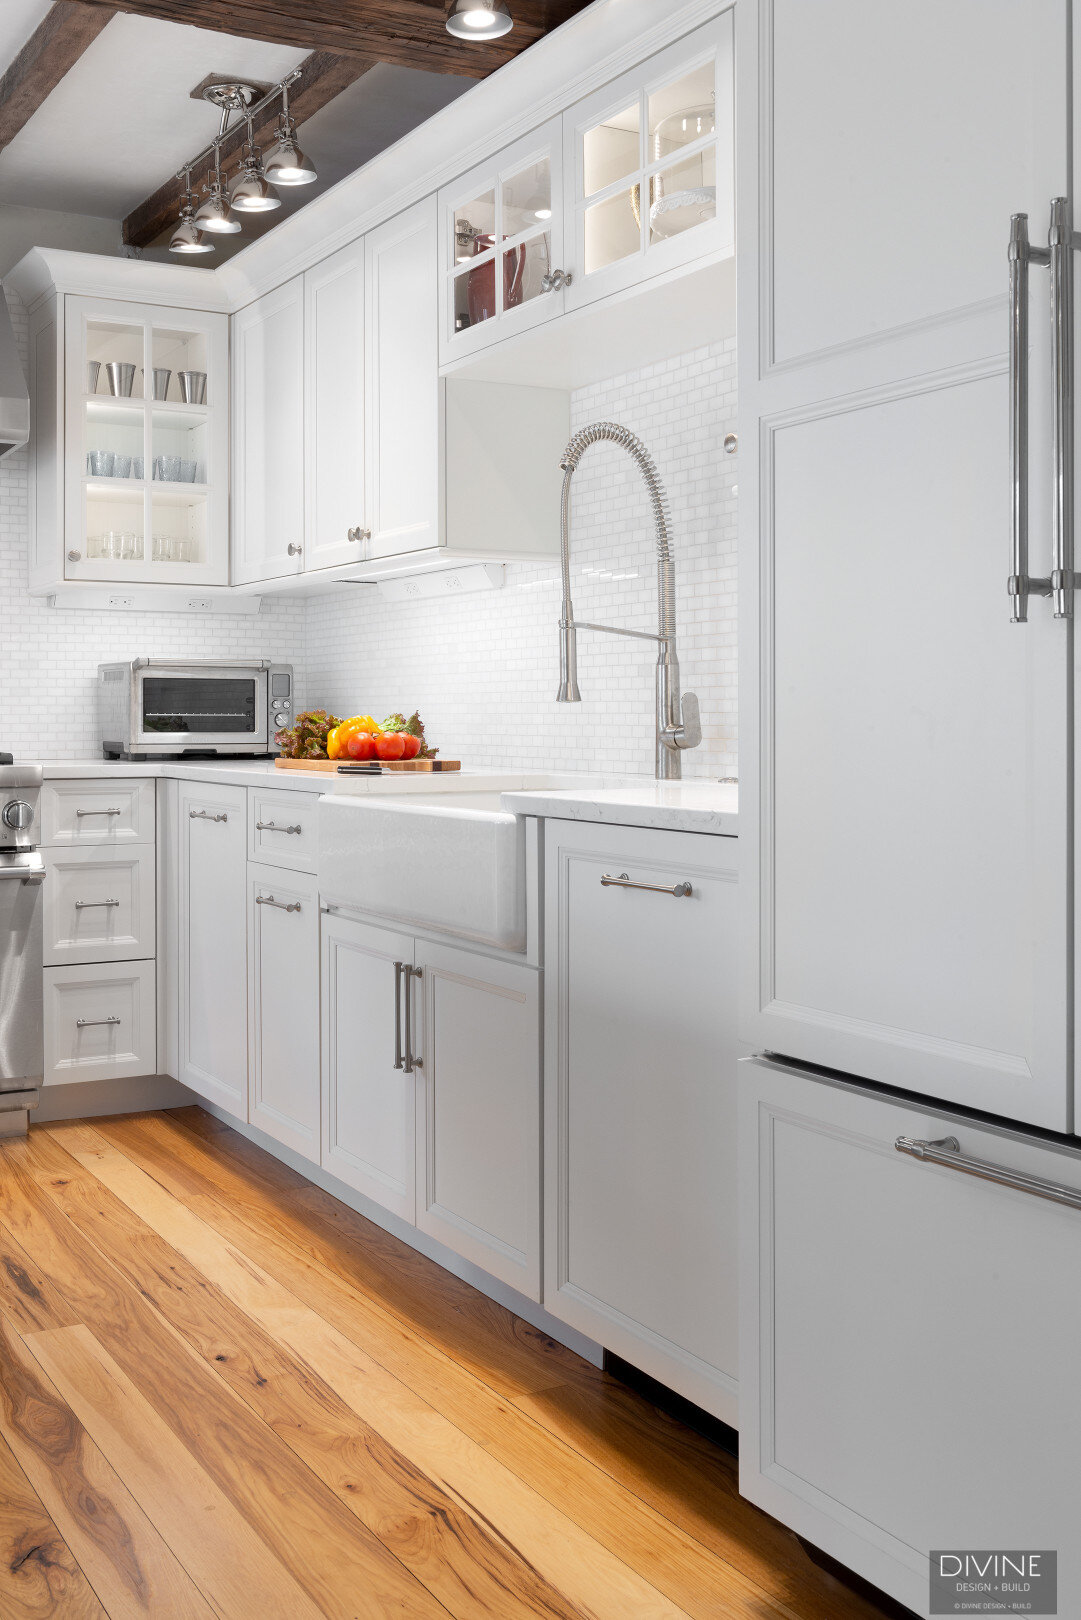 white, shaker style cabinets with brushed nickel accessories, white mosaic subway tile backsplash, cambria countertops with light marbling in grey tone and a paneled refrigerator. 